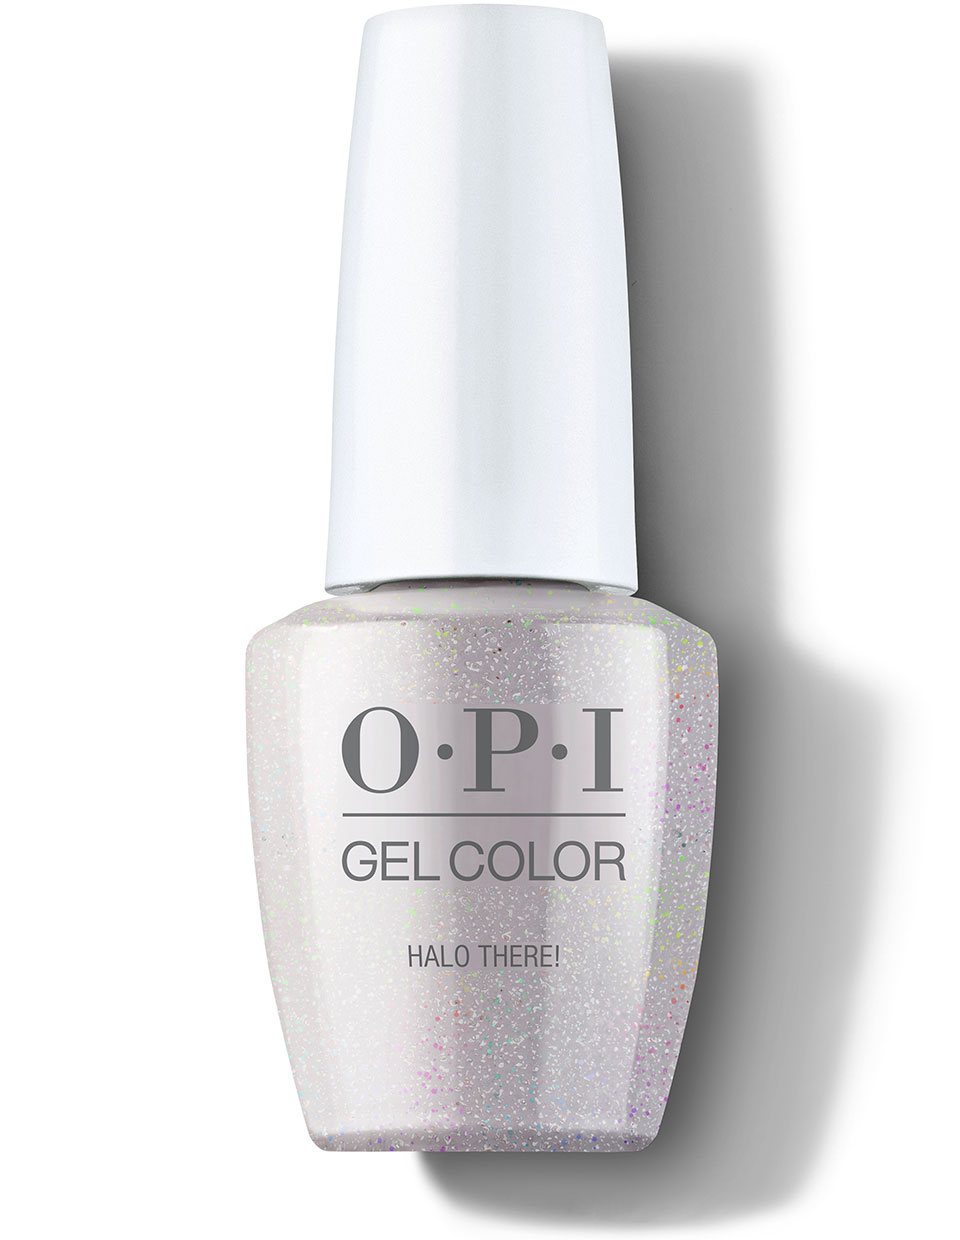 Halo There! - GelColor | OPI